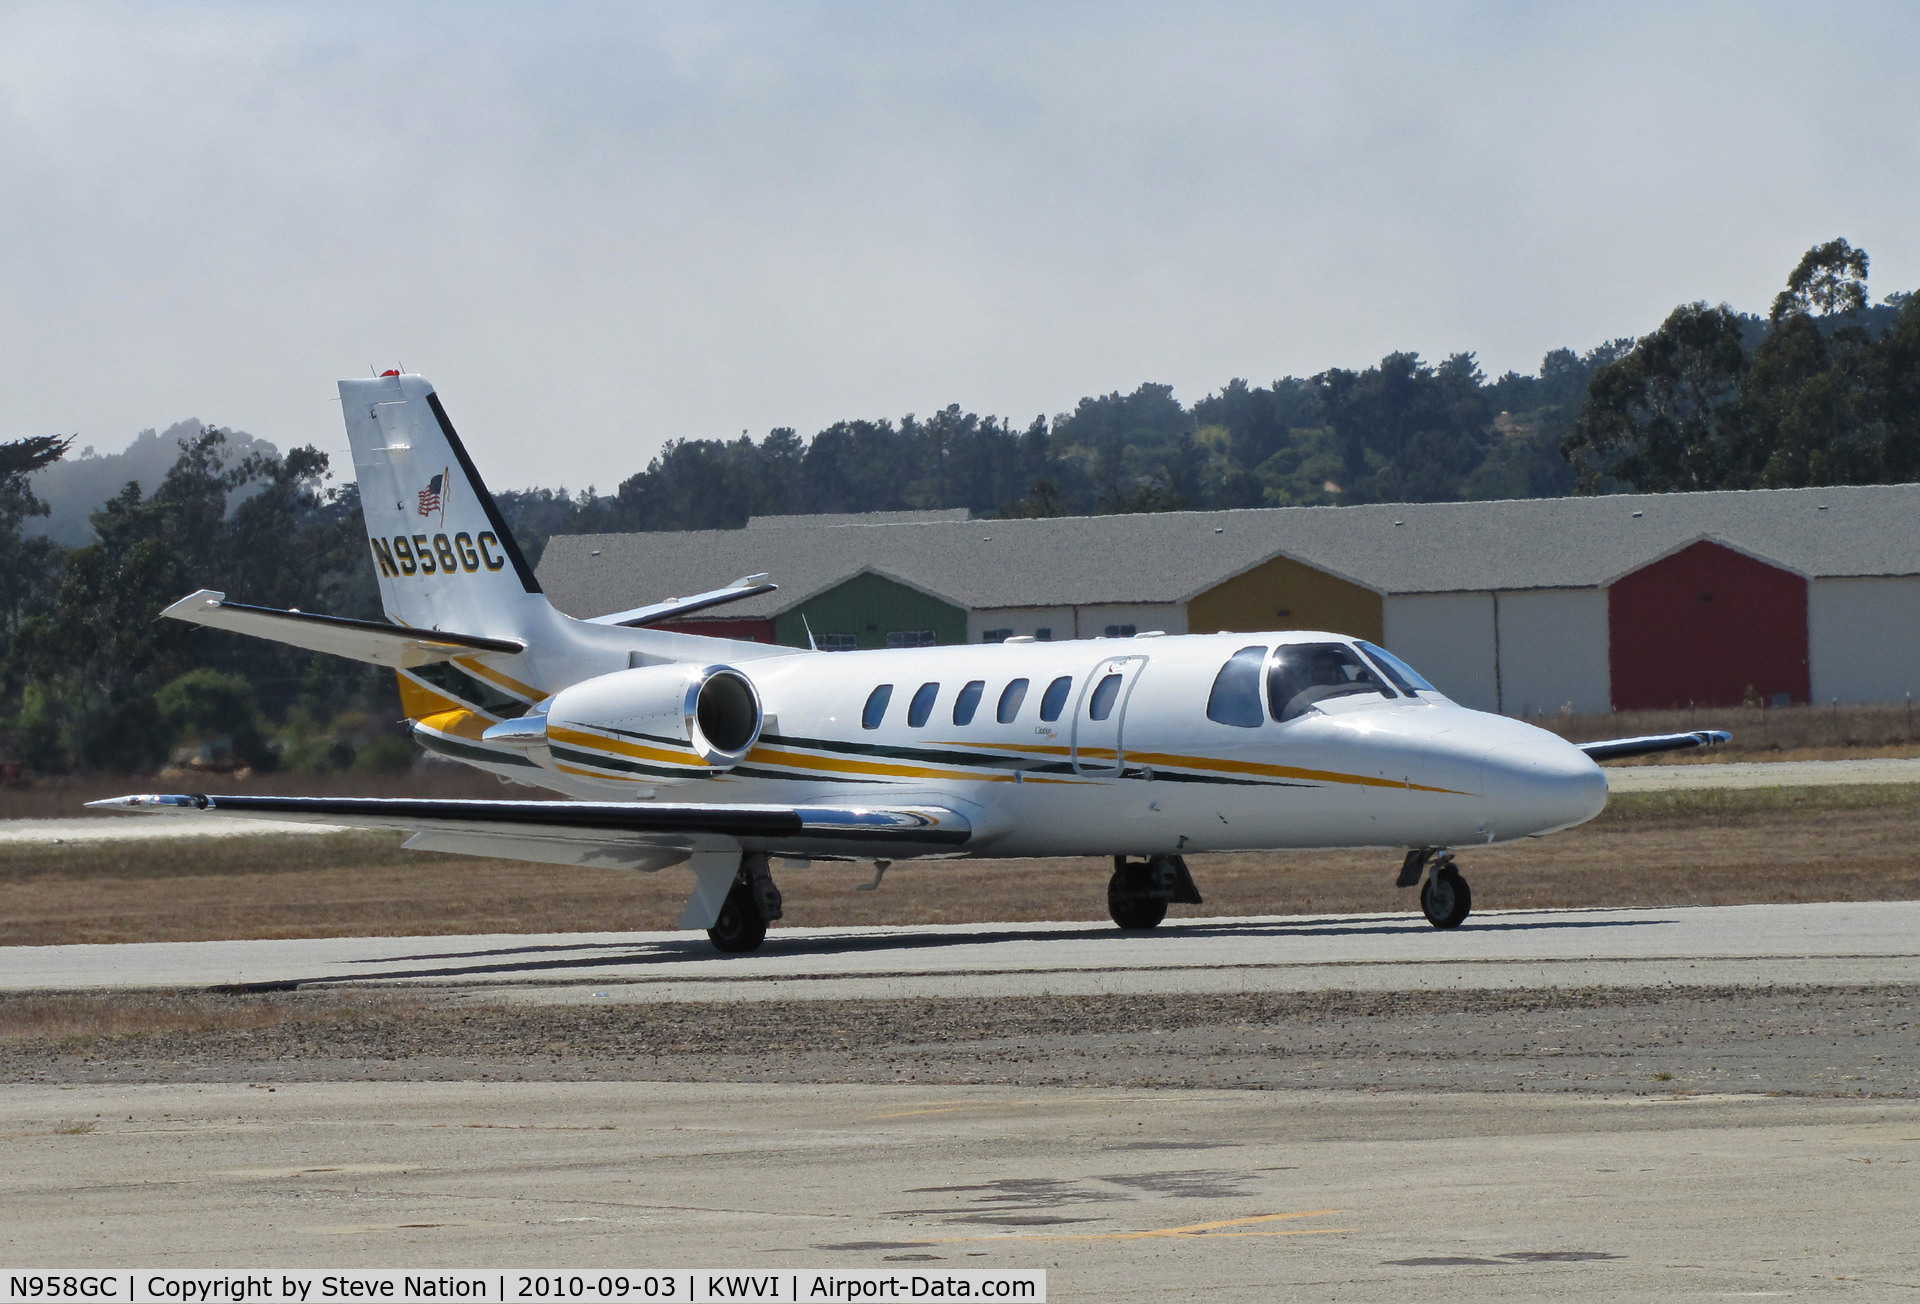 N958GC, 2002 Cessna 550 Citation II C/N 550-1016, GILC Corp 2002 Cessna 550 taxiing in at KWVI home base